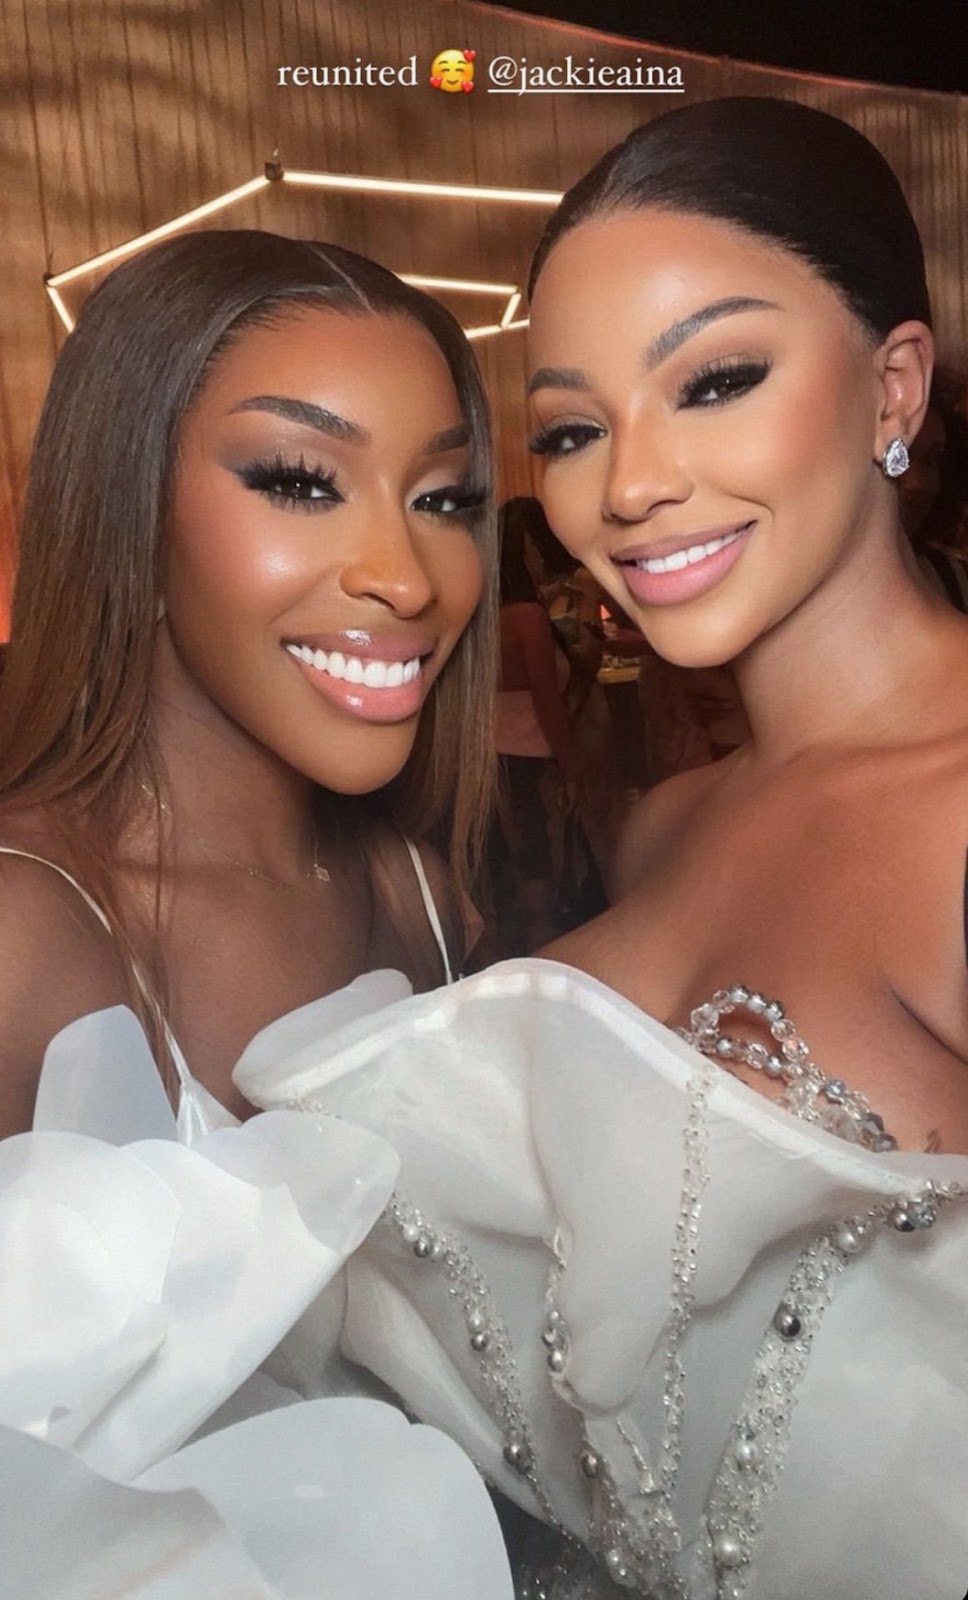 MET VIDEO Mihlali Ndamase posed for picture with Jackie Aina